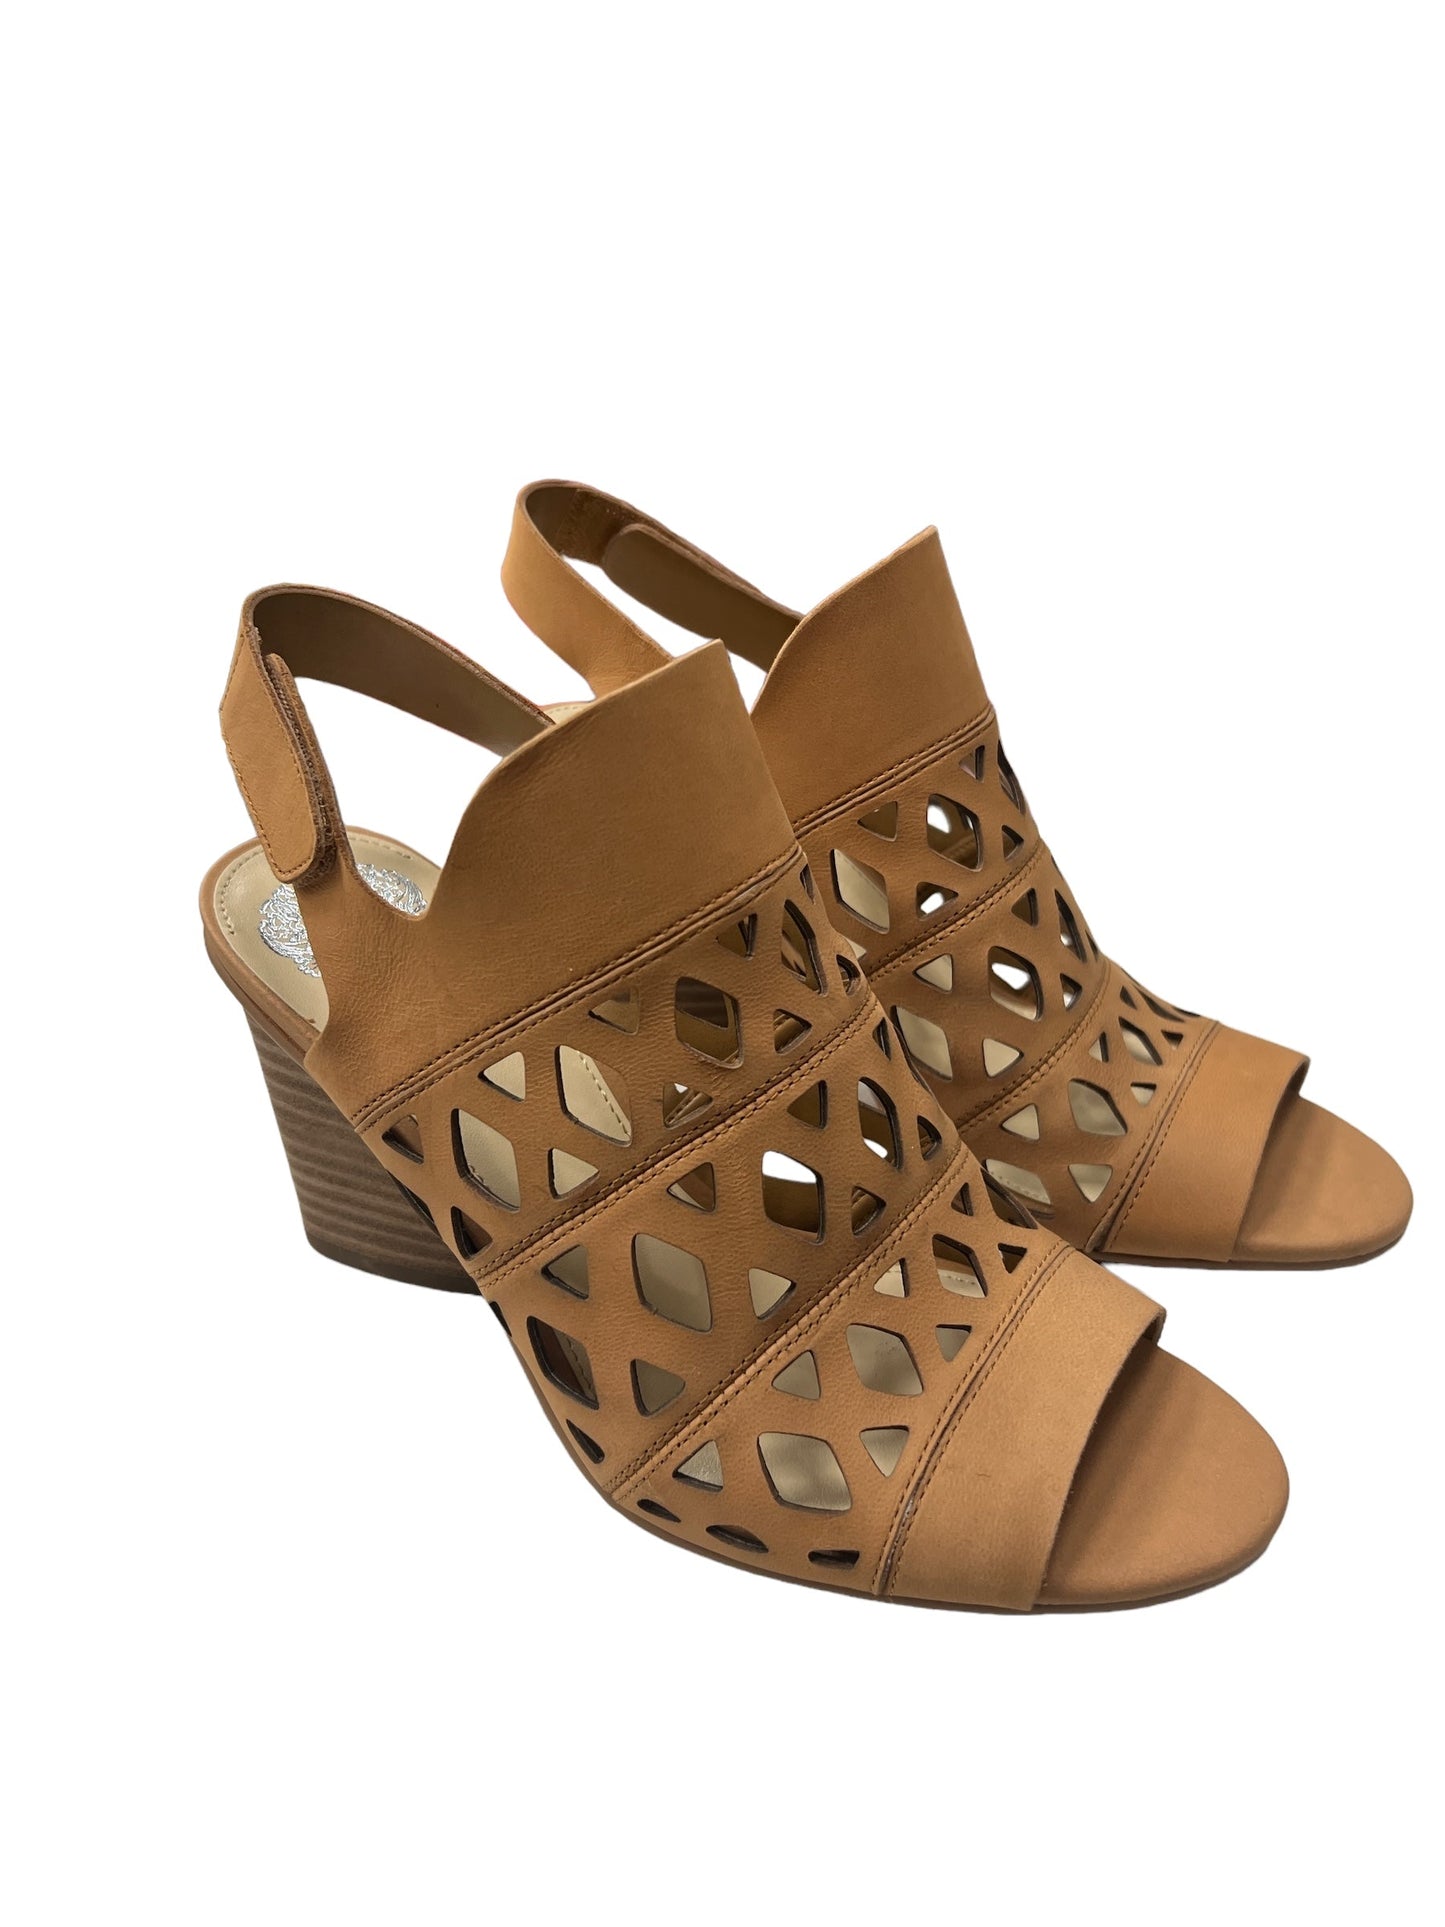 Sandals Heels Wedge By Vince Camuto  Size: 7